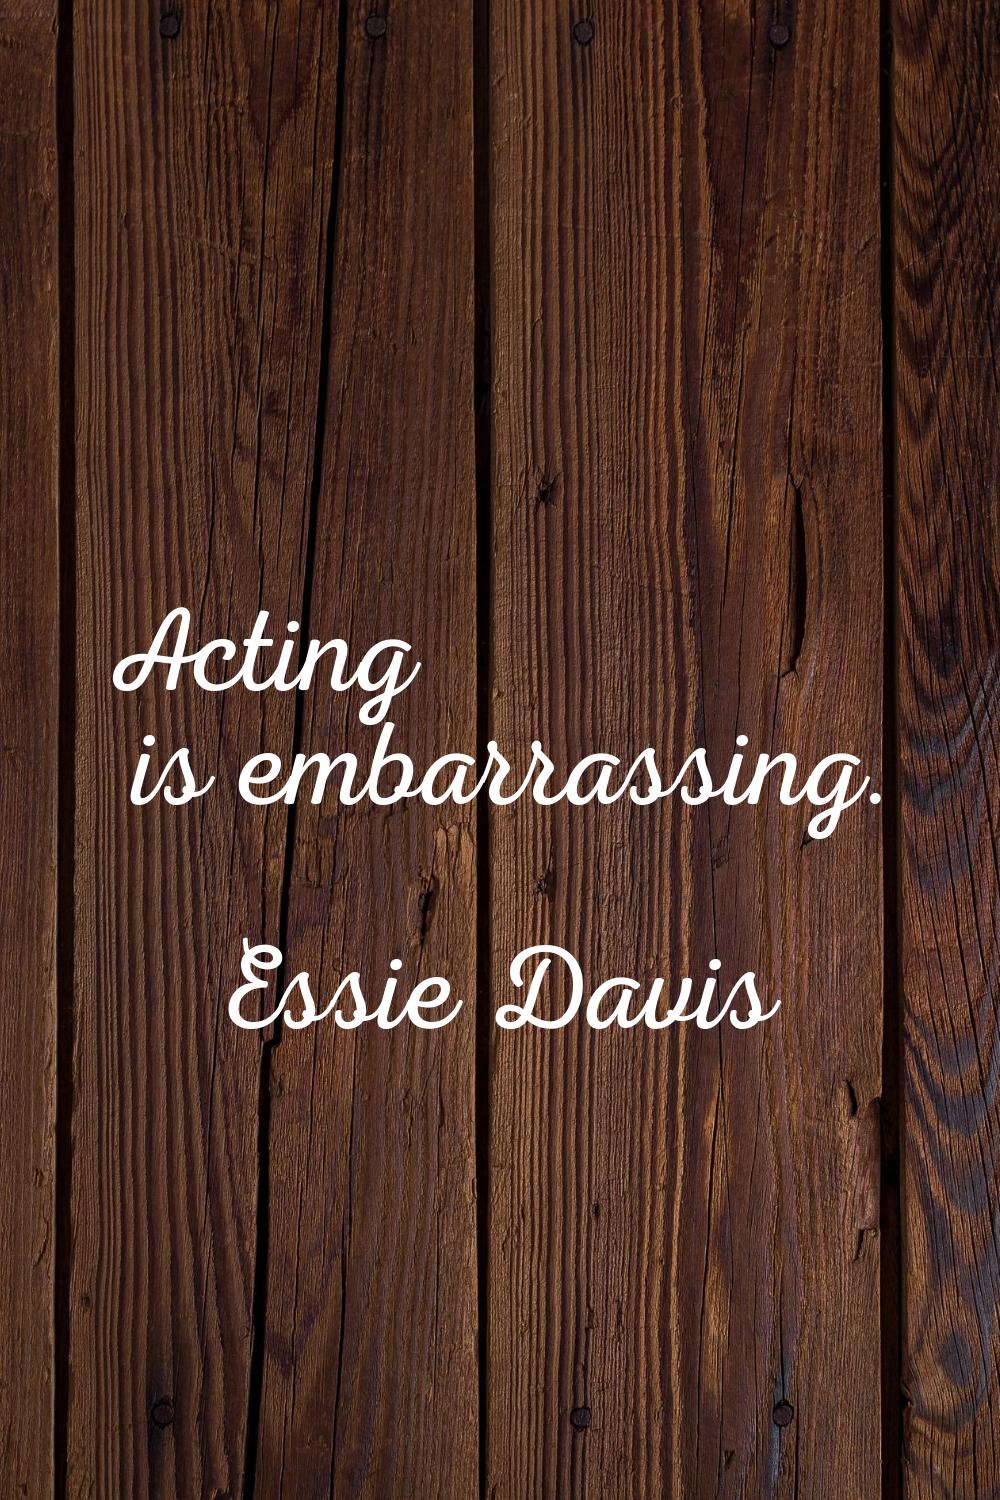 Acting is embarrassing.